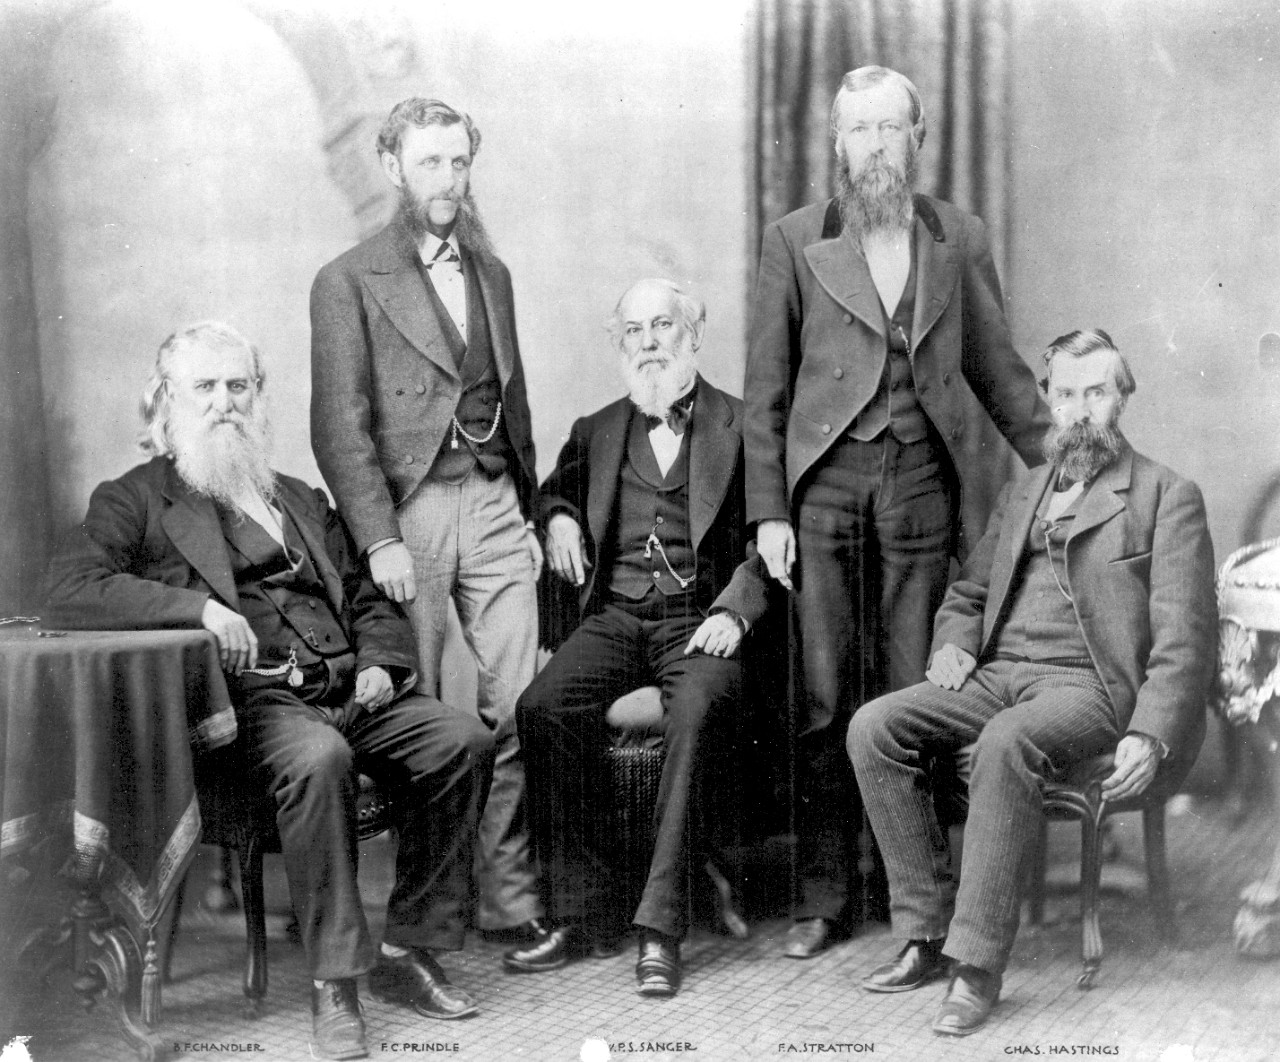 The first Navy Civil Engineer Corps officers: B.F. Chandler, F.C. Prindle, W.P.S. Sanger, F.A. Hastings, and Charles Hastings, c. 1860s. The Navy created the Civil Engineer Corps on March 2, 1867. The original duties of the Civil Engineer Corps i...